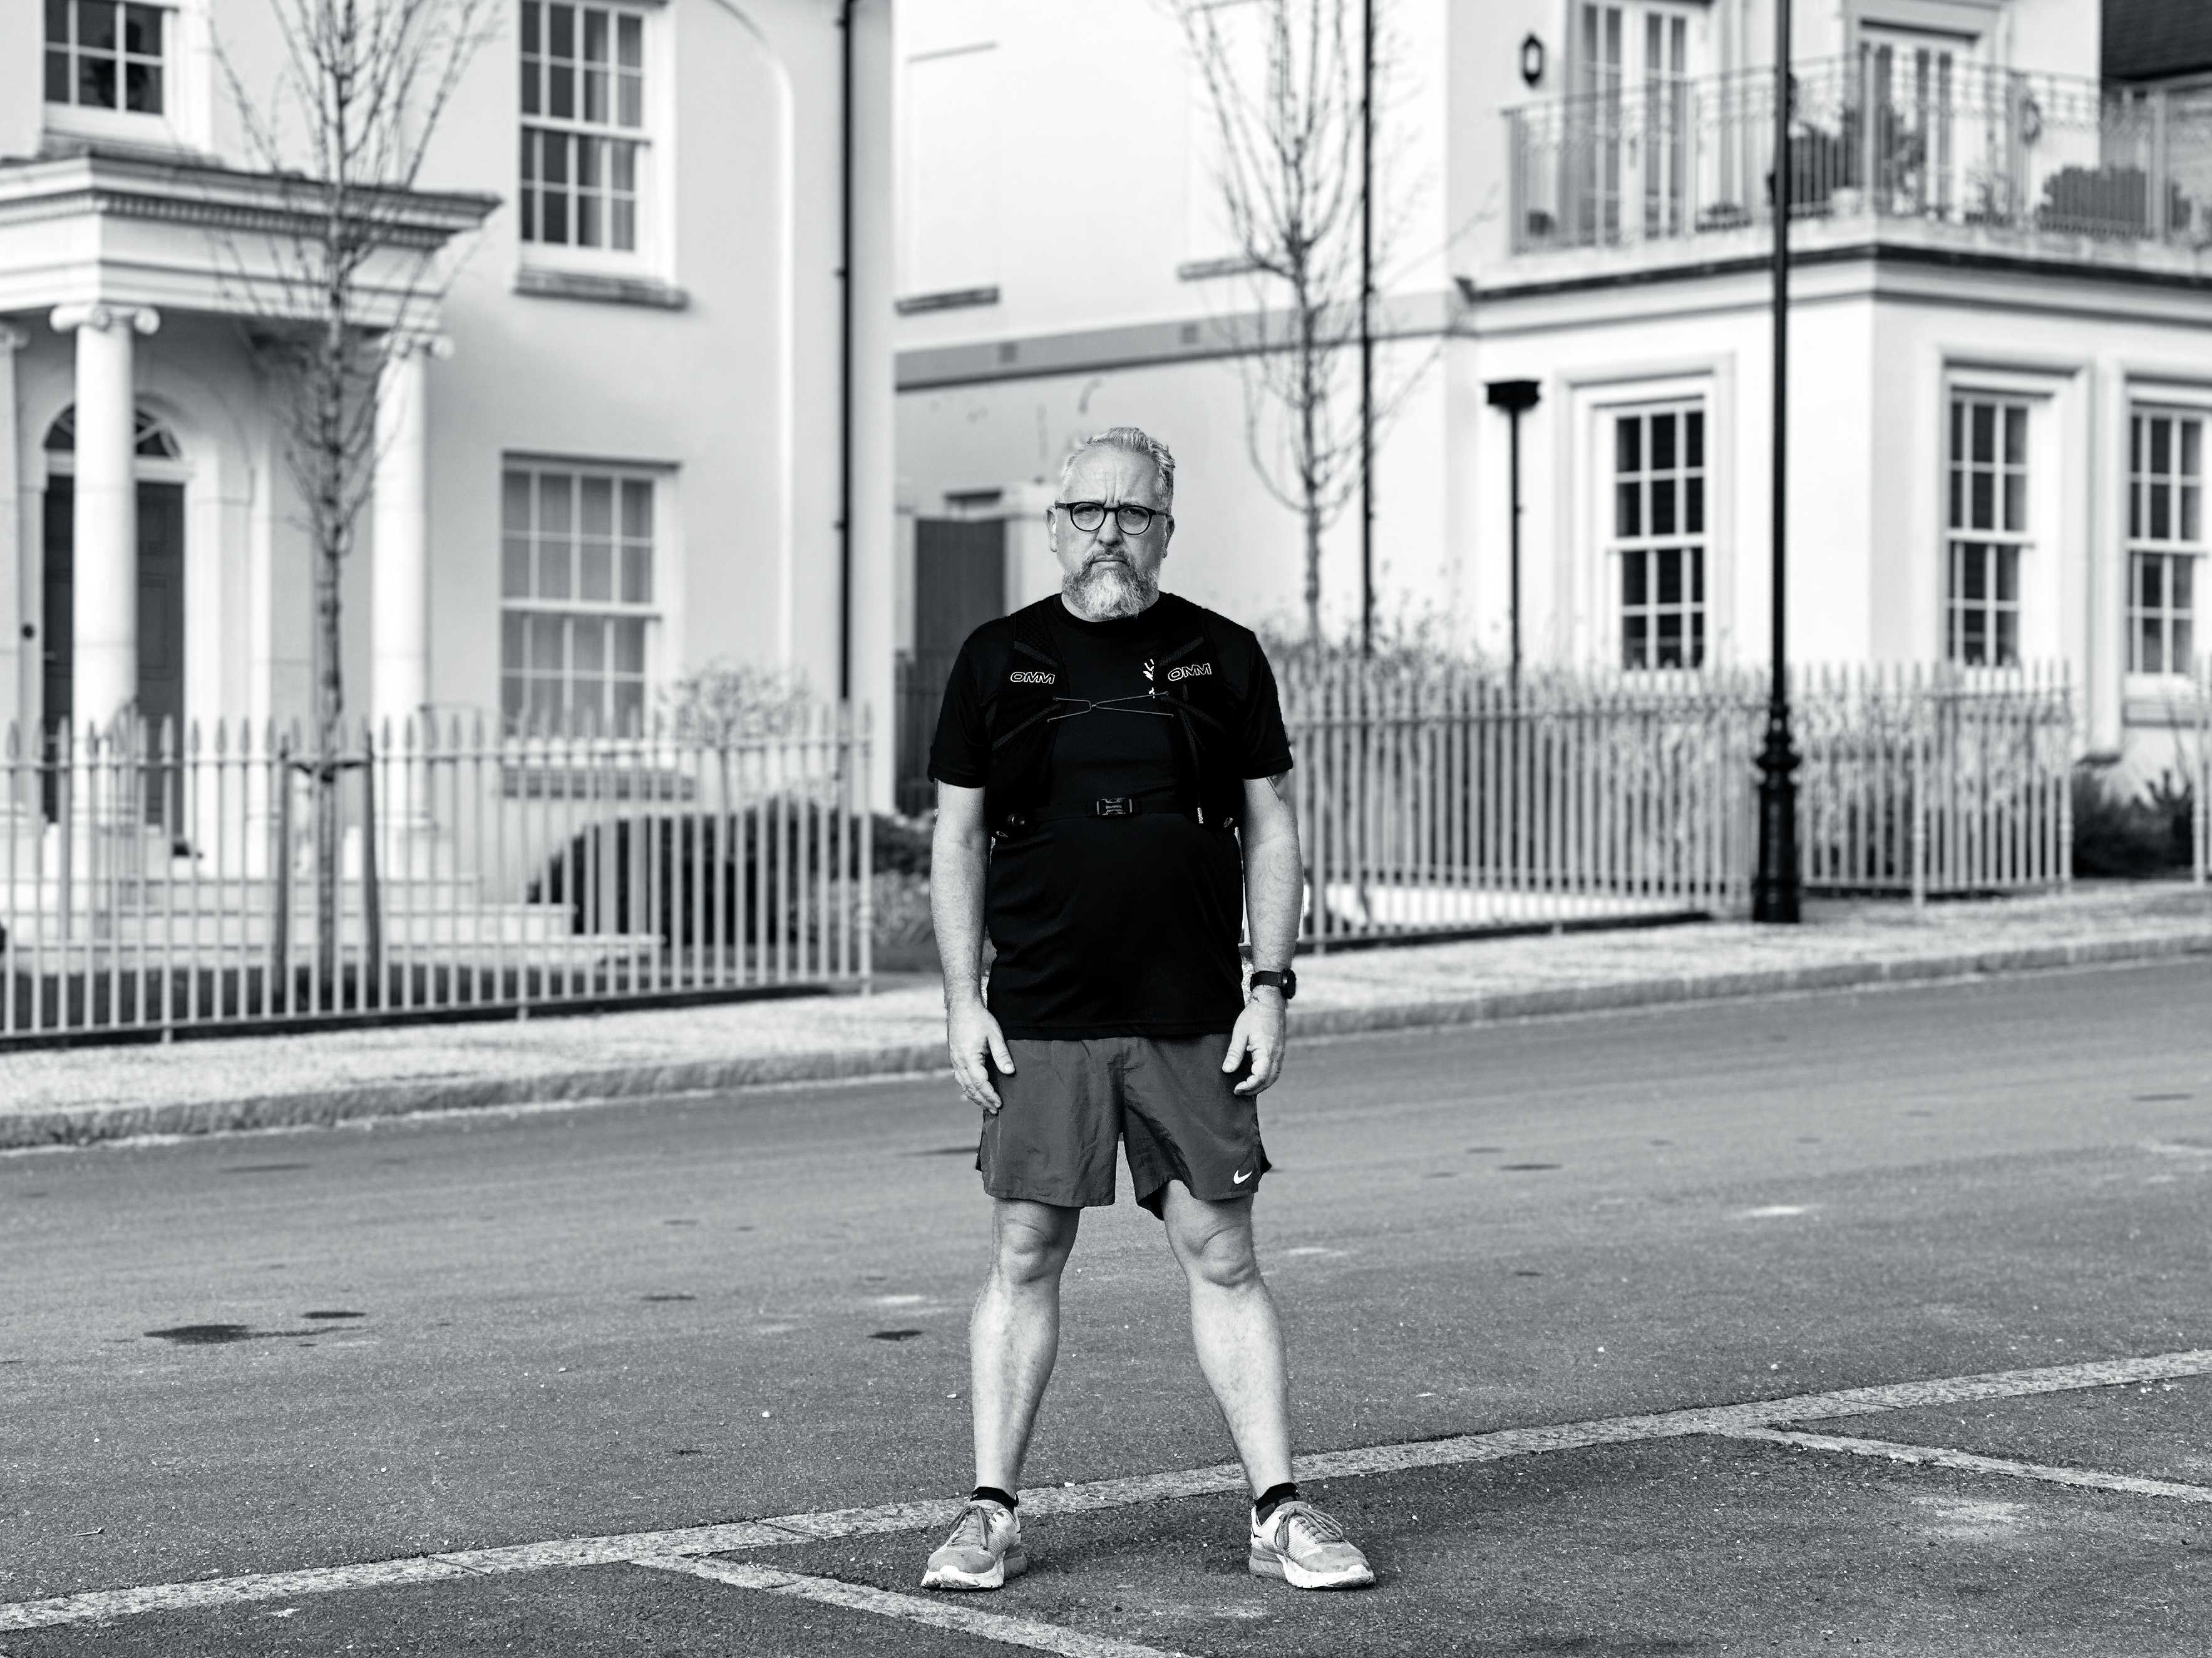 Stuart stands in the road in front of some nice white rendered houses in his running attire looking a bit grumpy